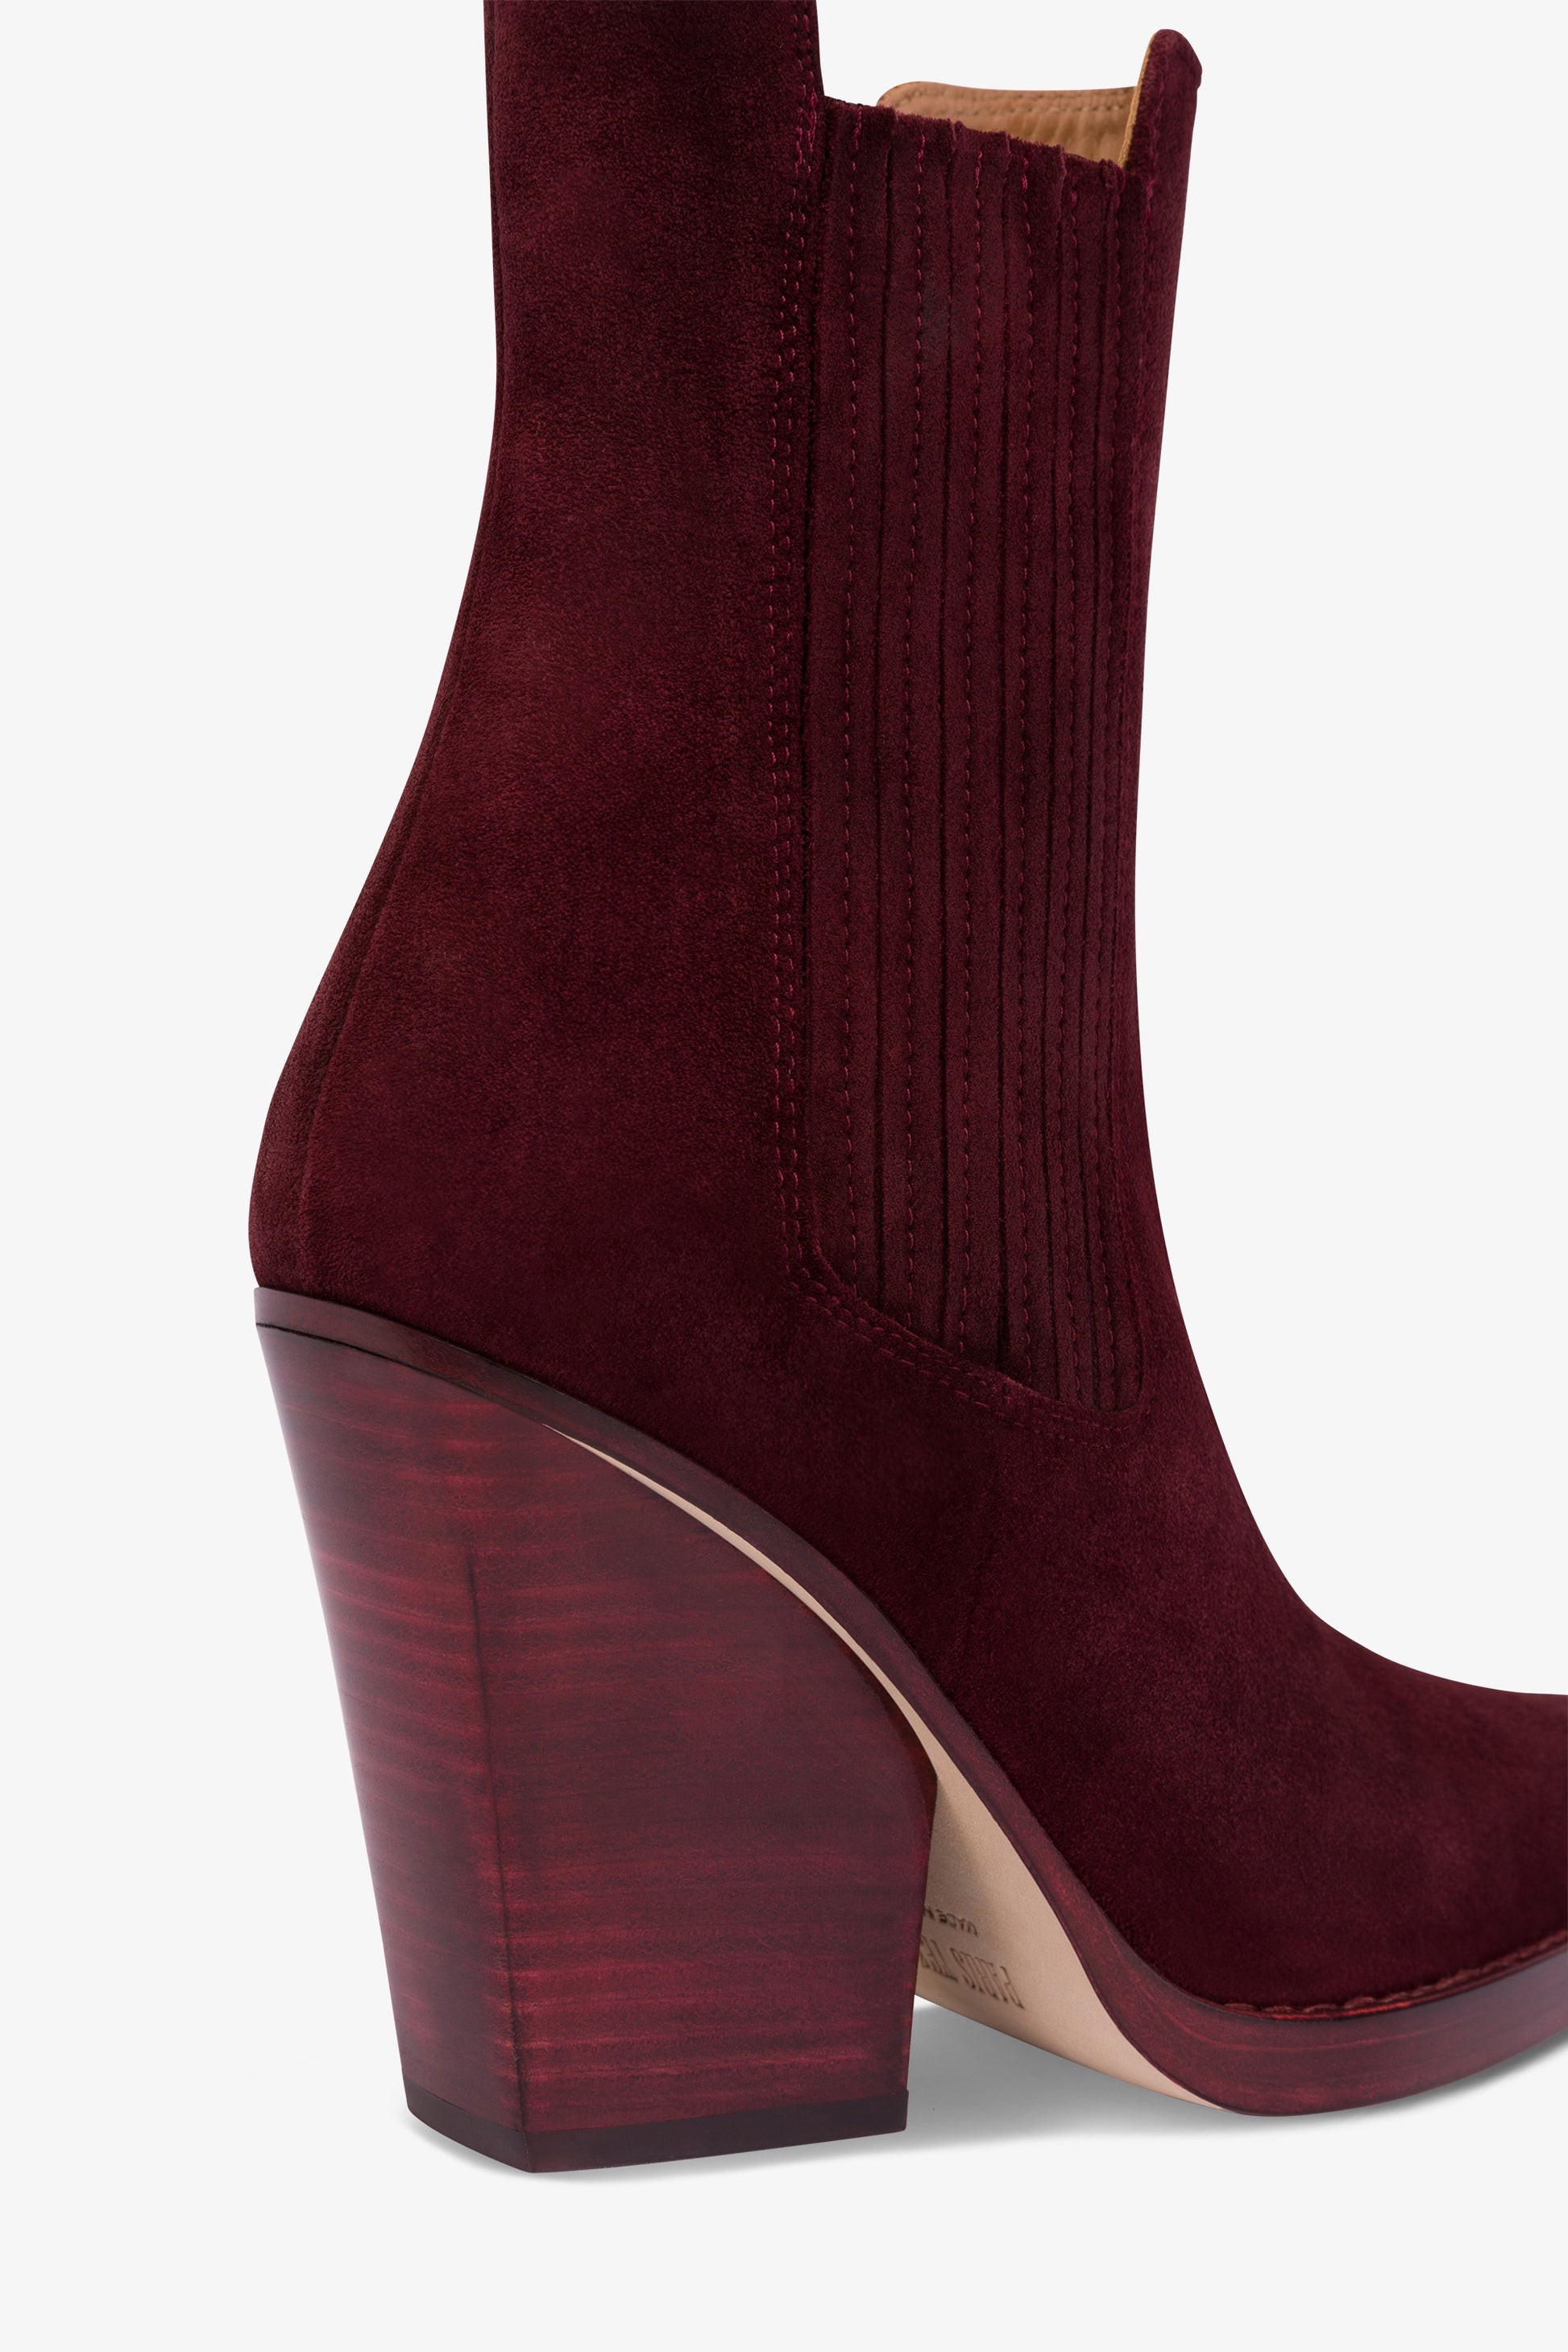 Square-toe ankle boots in Kenya suede leather